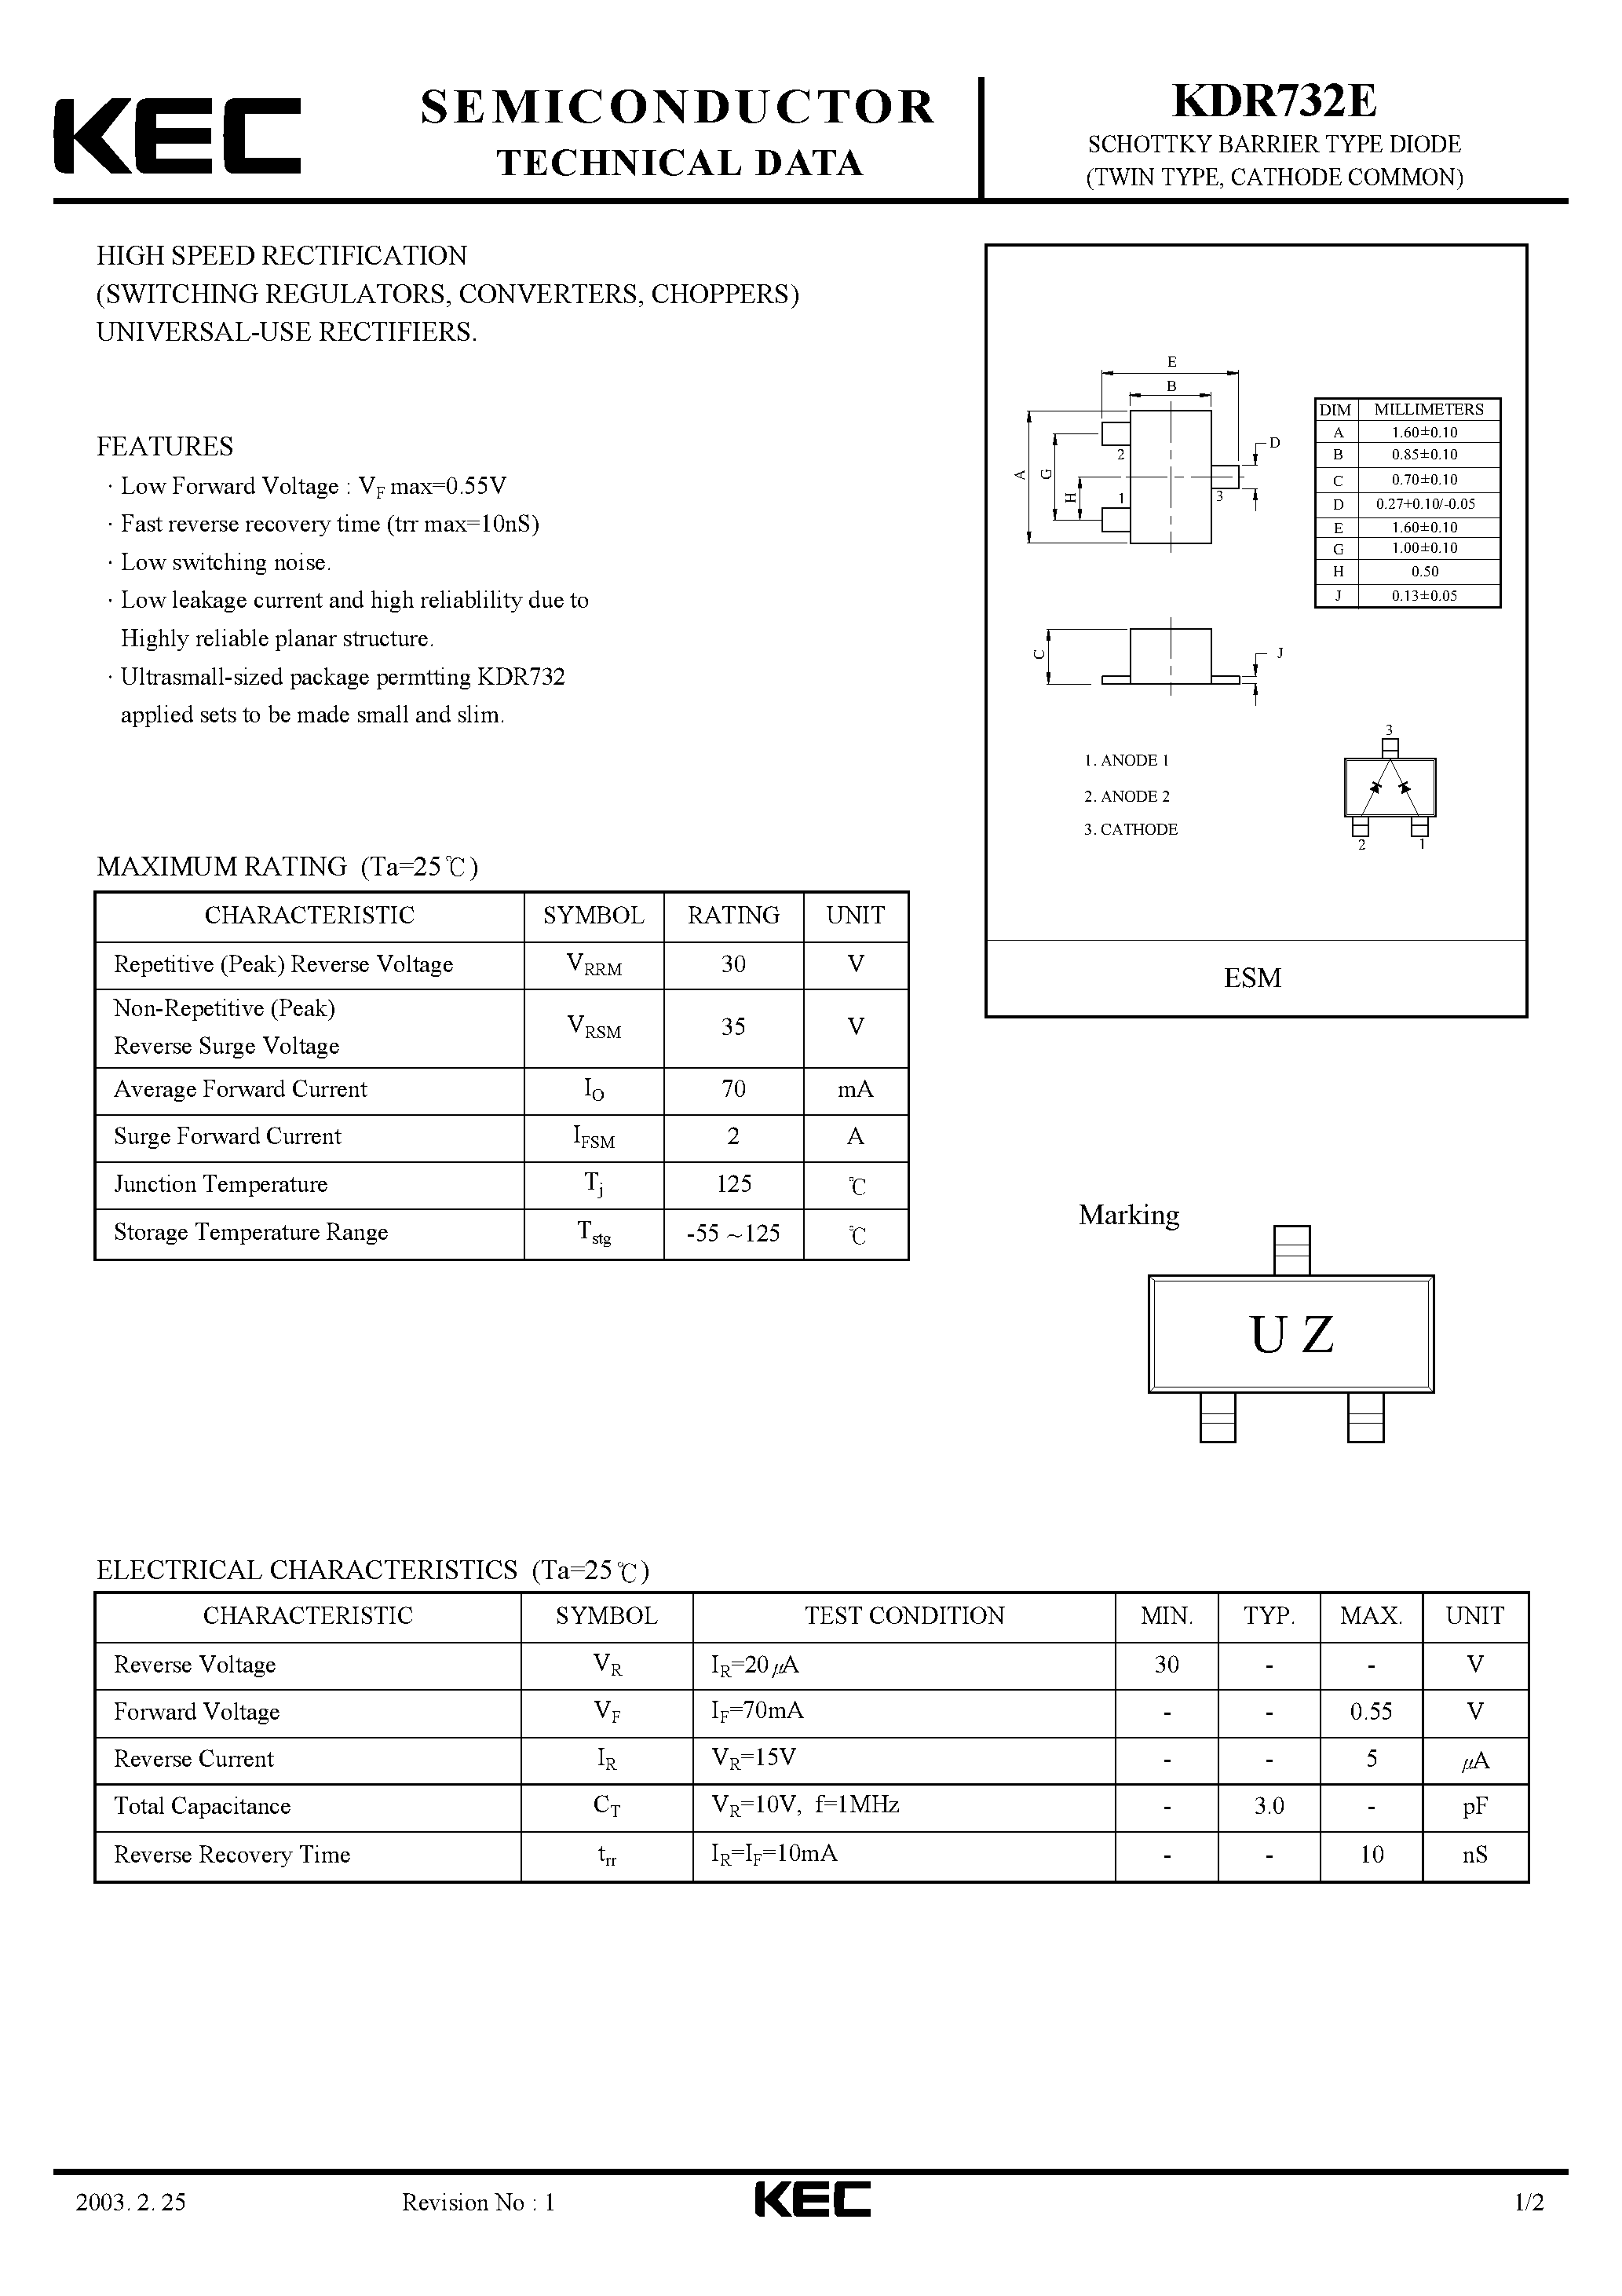 Datasheet KDR732E - SCHOTTKY BARRIER TYPE DIODE (TWIN TYPE/ CATHODE COMMON) page 1